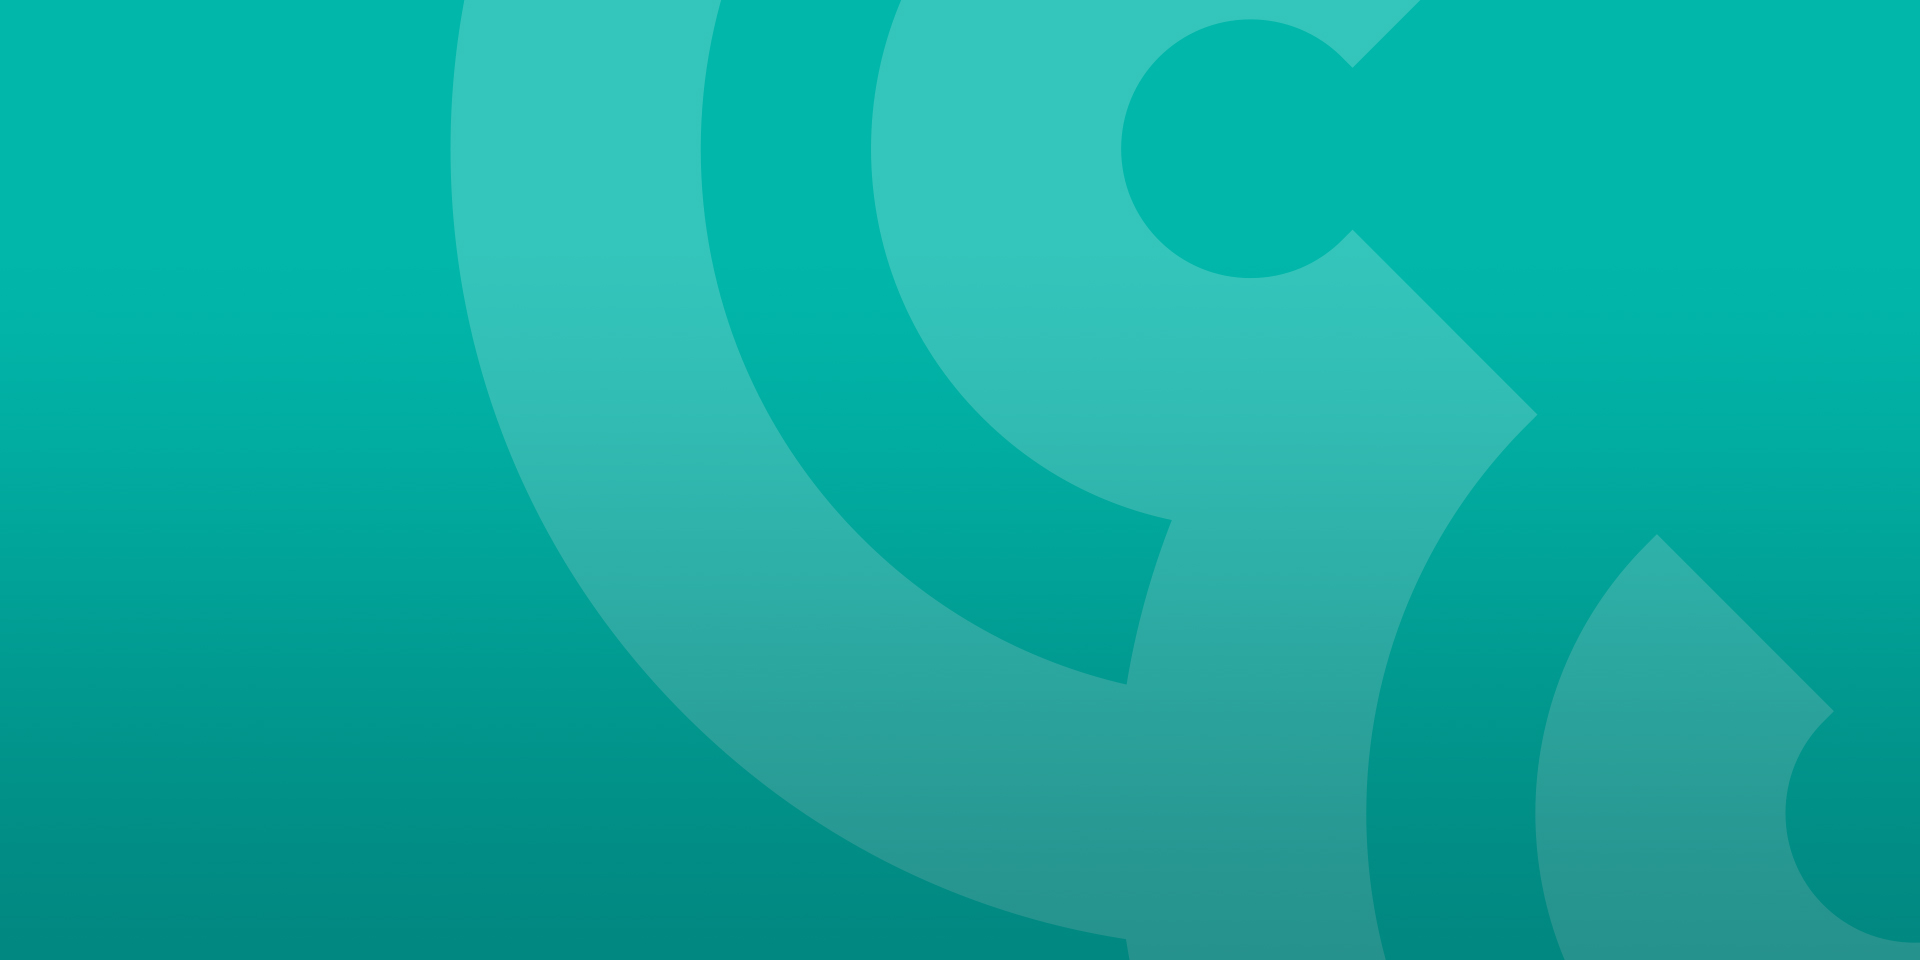 A graphic showing a dark teal background with thick light teal lines that are part of the Chemonics logo.